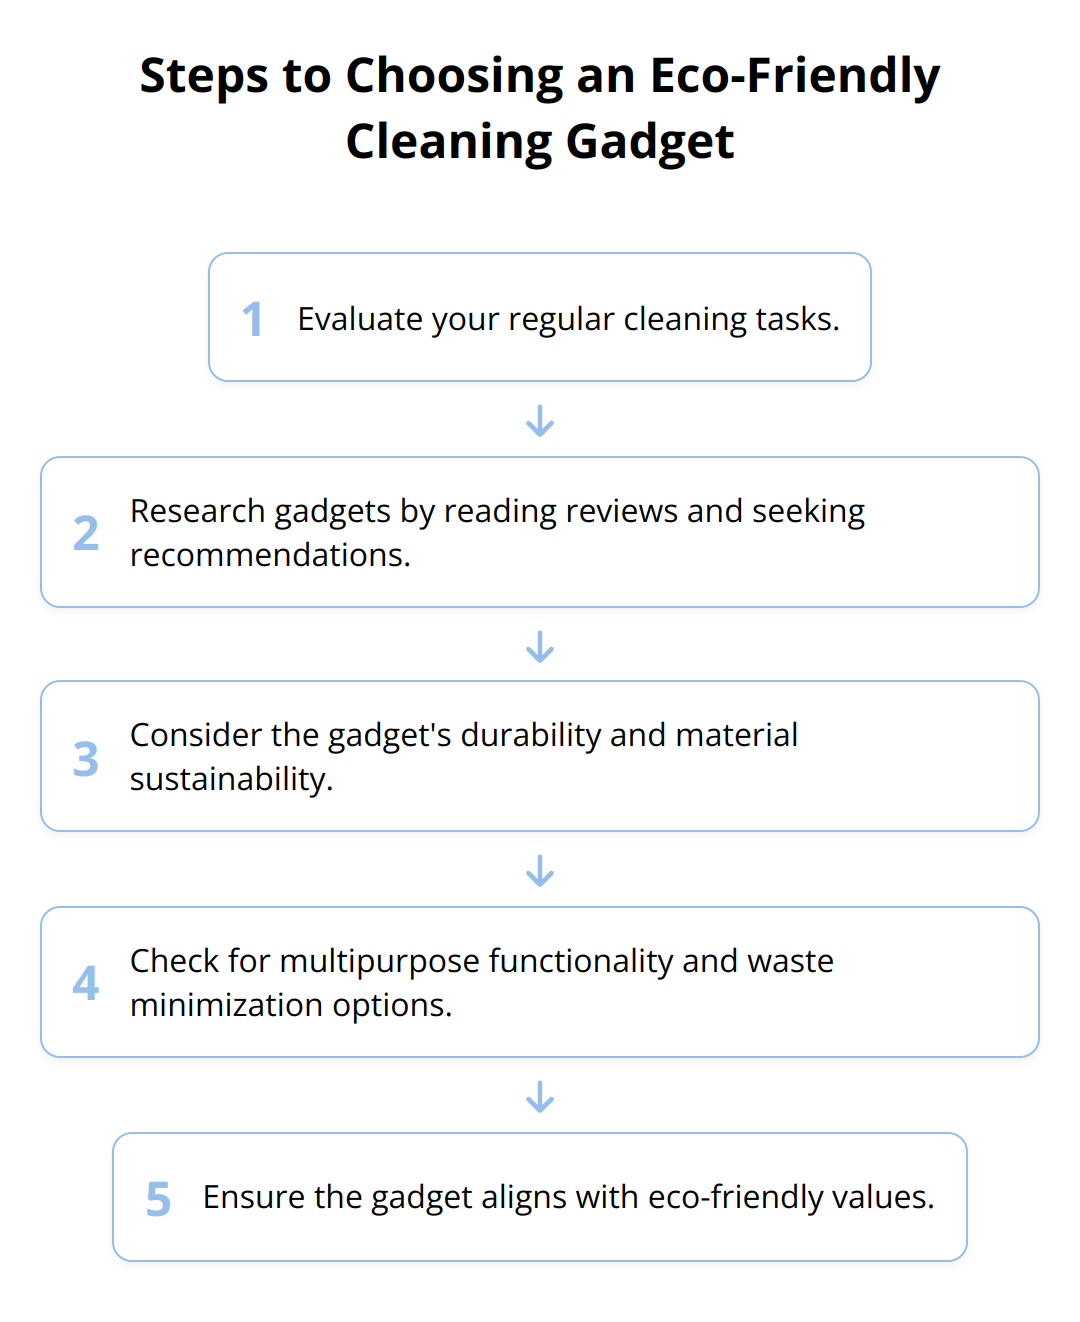 Flow Chart - Steps to Choosing an Eco-Friendly Cleaning Gadget